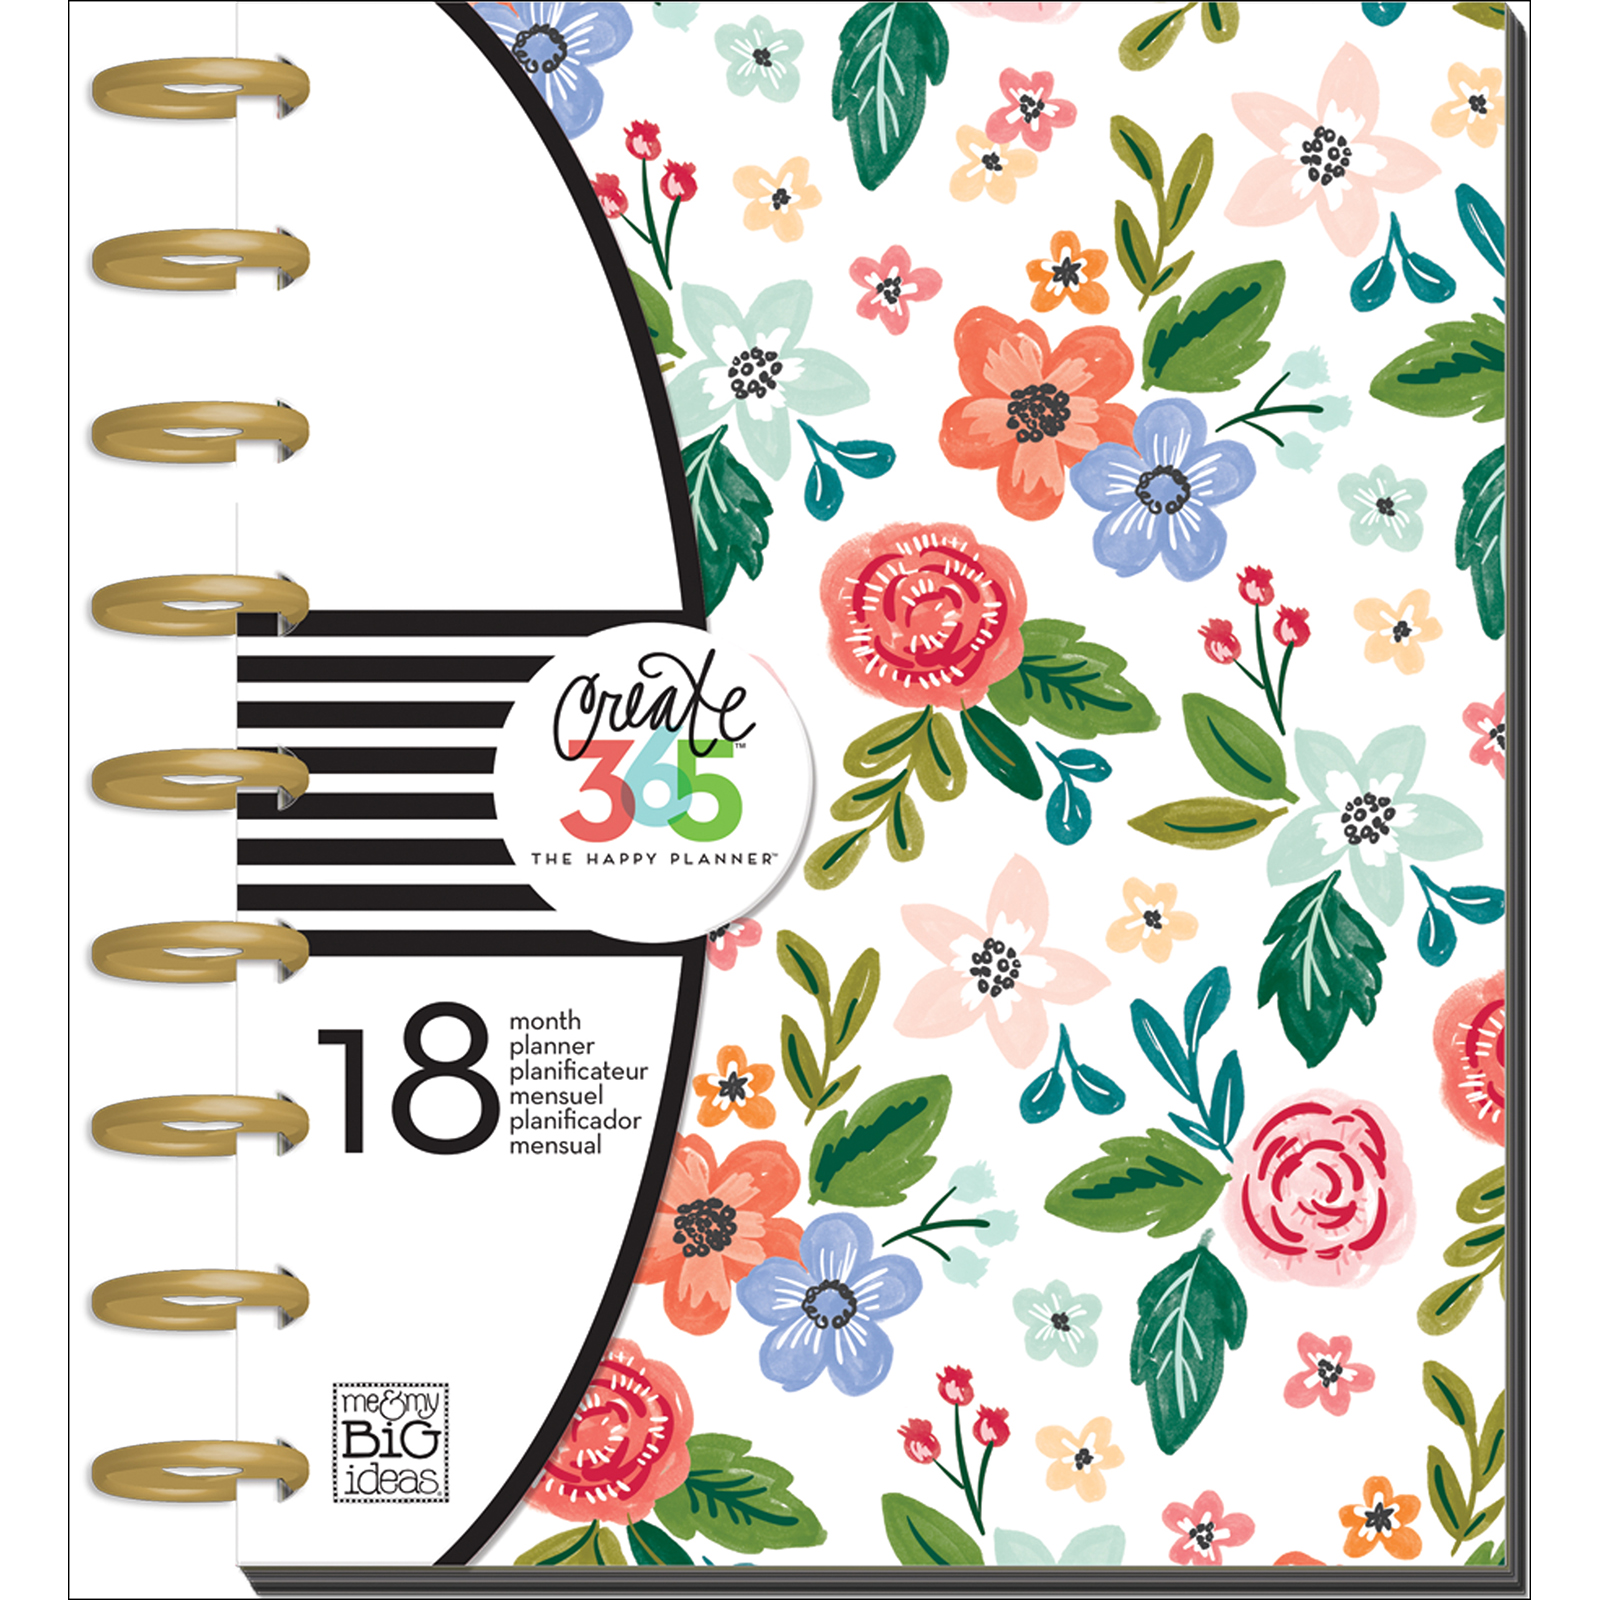 http://www.michaels.com/create-365-the-happy-planner-2016-17-flowers/10469220.html#q=happy+planners&start=3